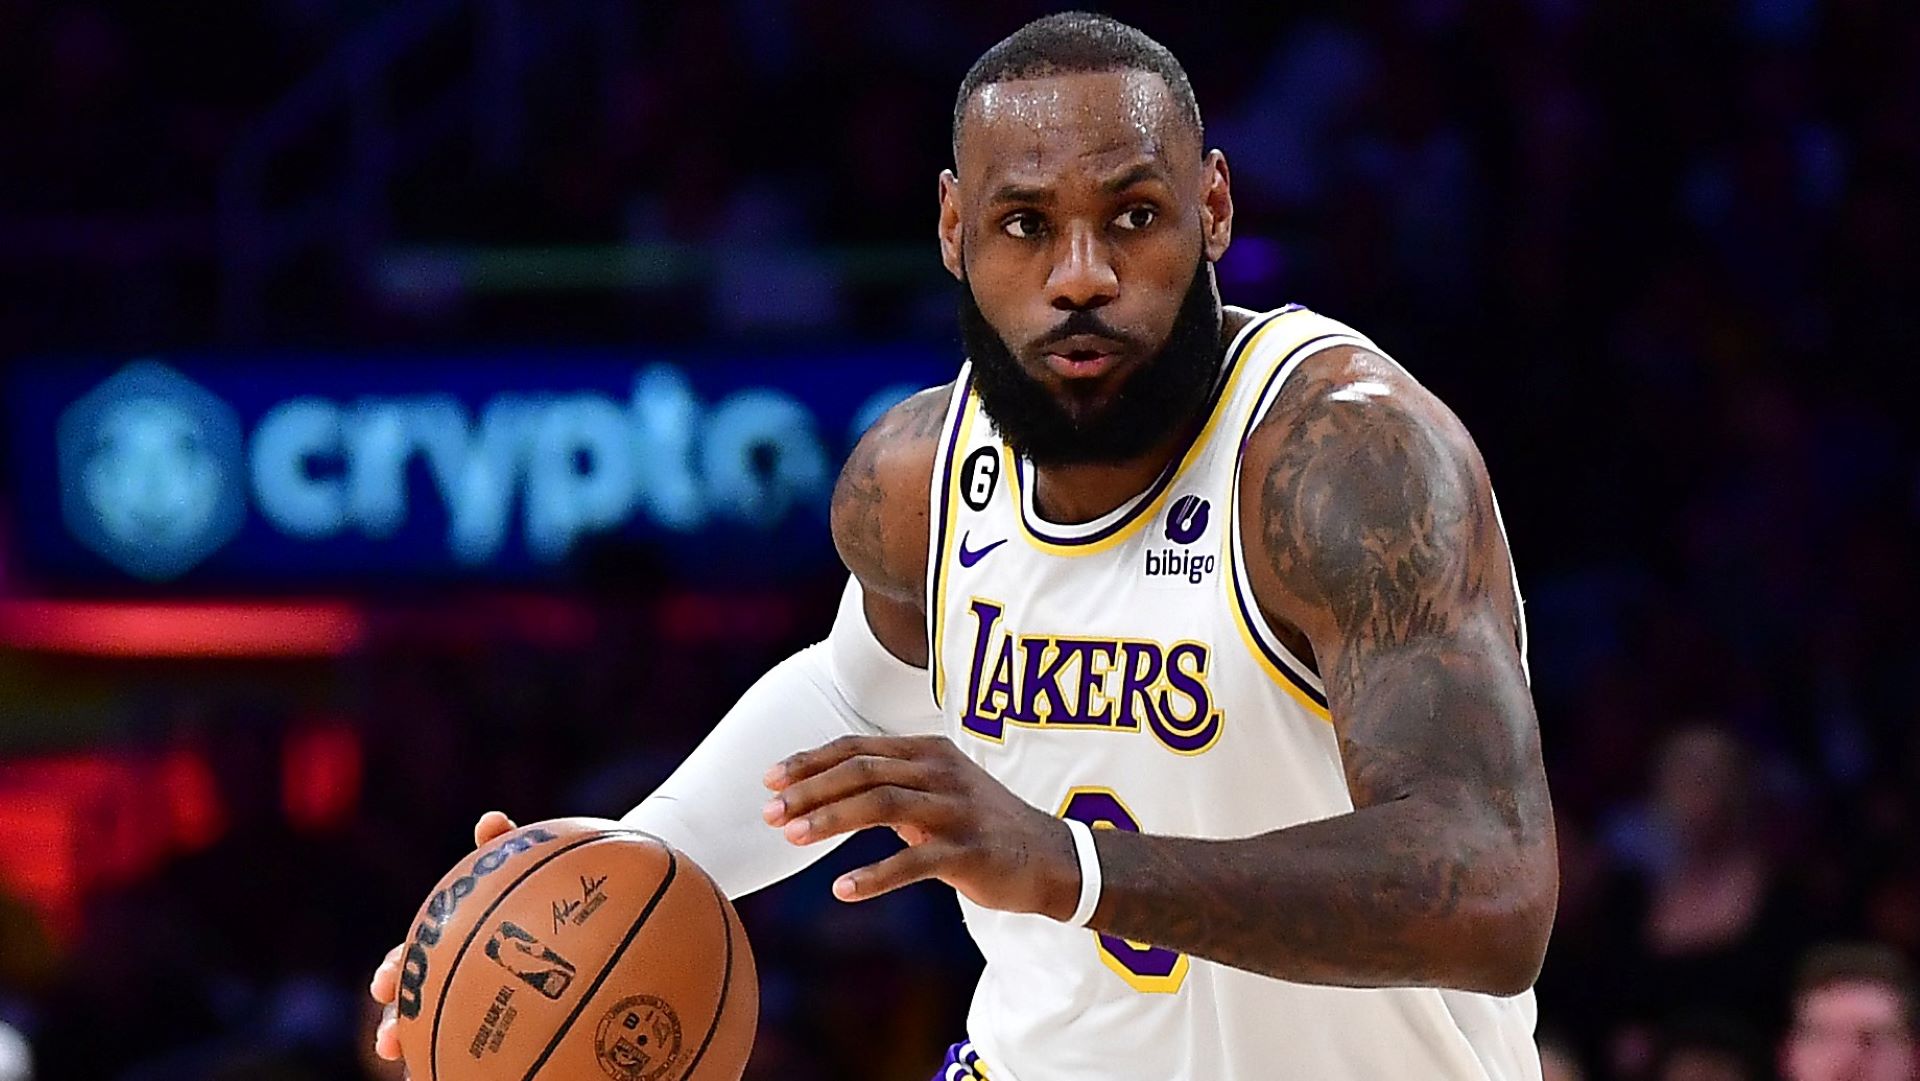 Lakers Star LeBron James Reacts To Son’s College Commitment